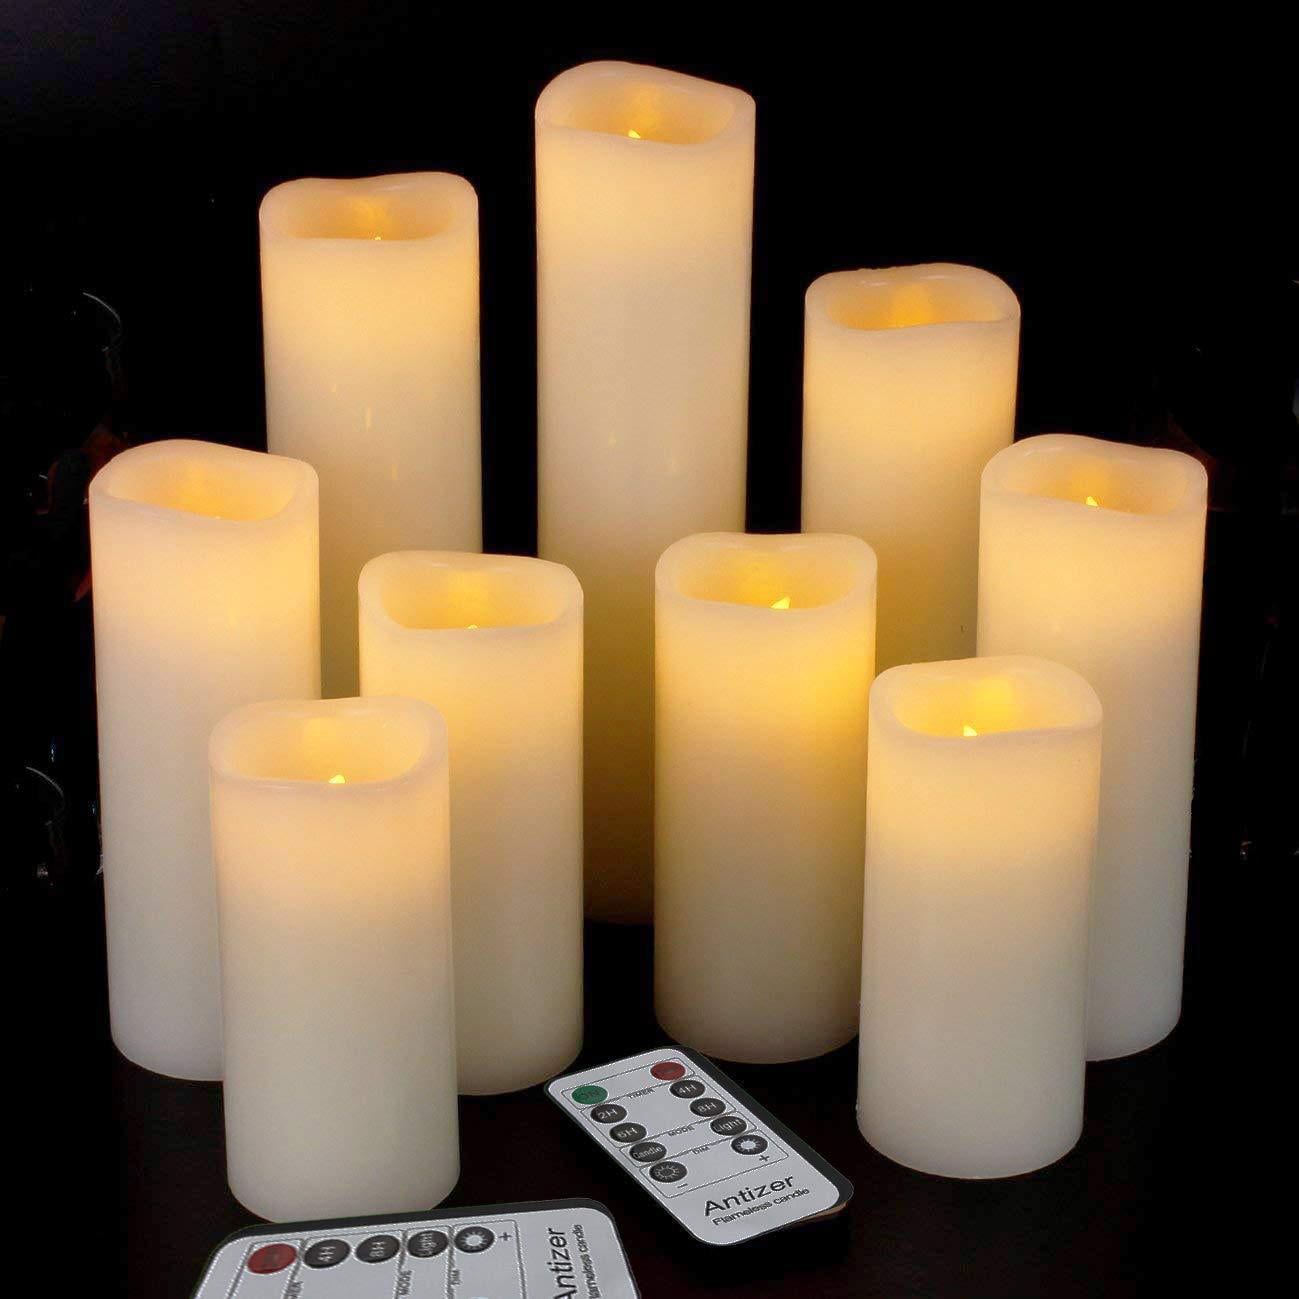 Parties-Comenzar Flameless Candles LED Drip Candles Set of 4 5 6 Ivory Dripping Wax Pillar candles Battery Operated Candles Automatic with 6-H Timer Function Candle Flameless for Wedding